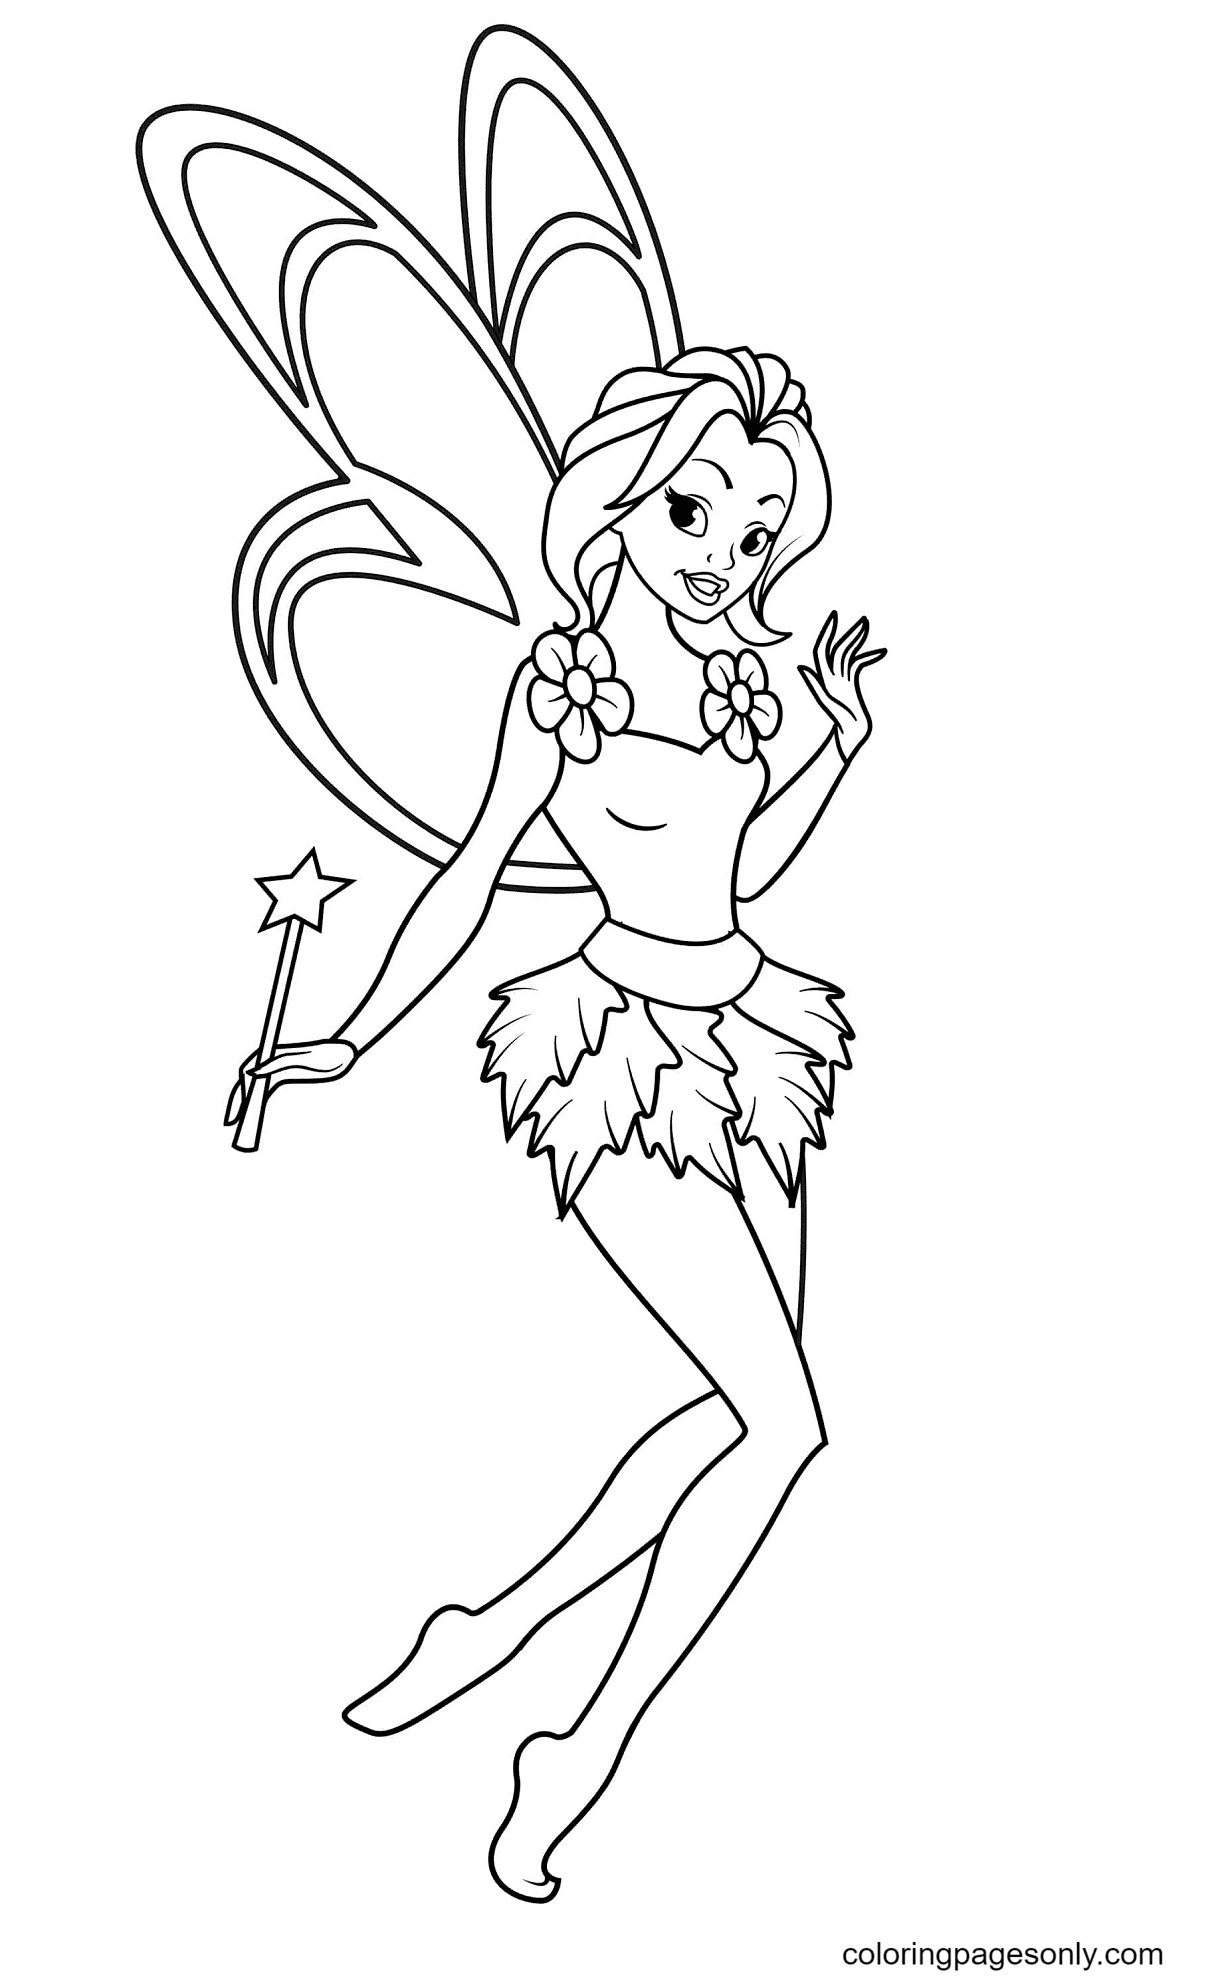 Tinkerbell in Flight Coloring Page